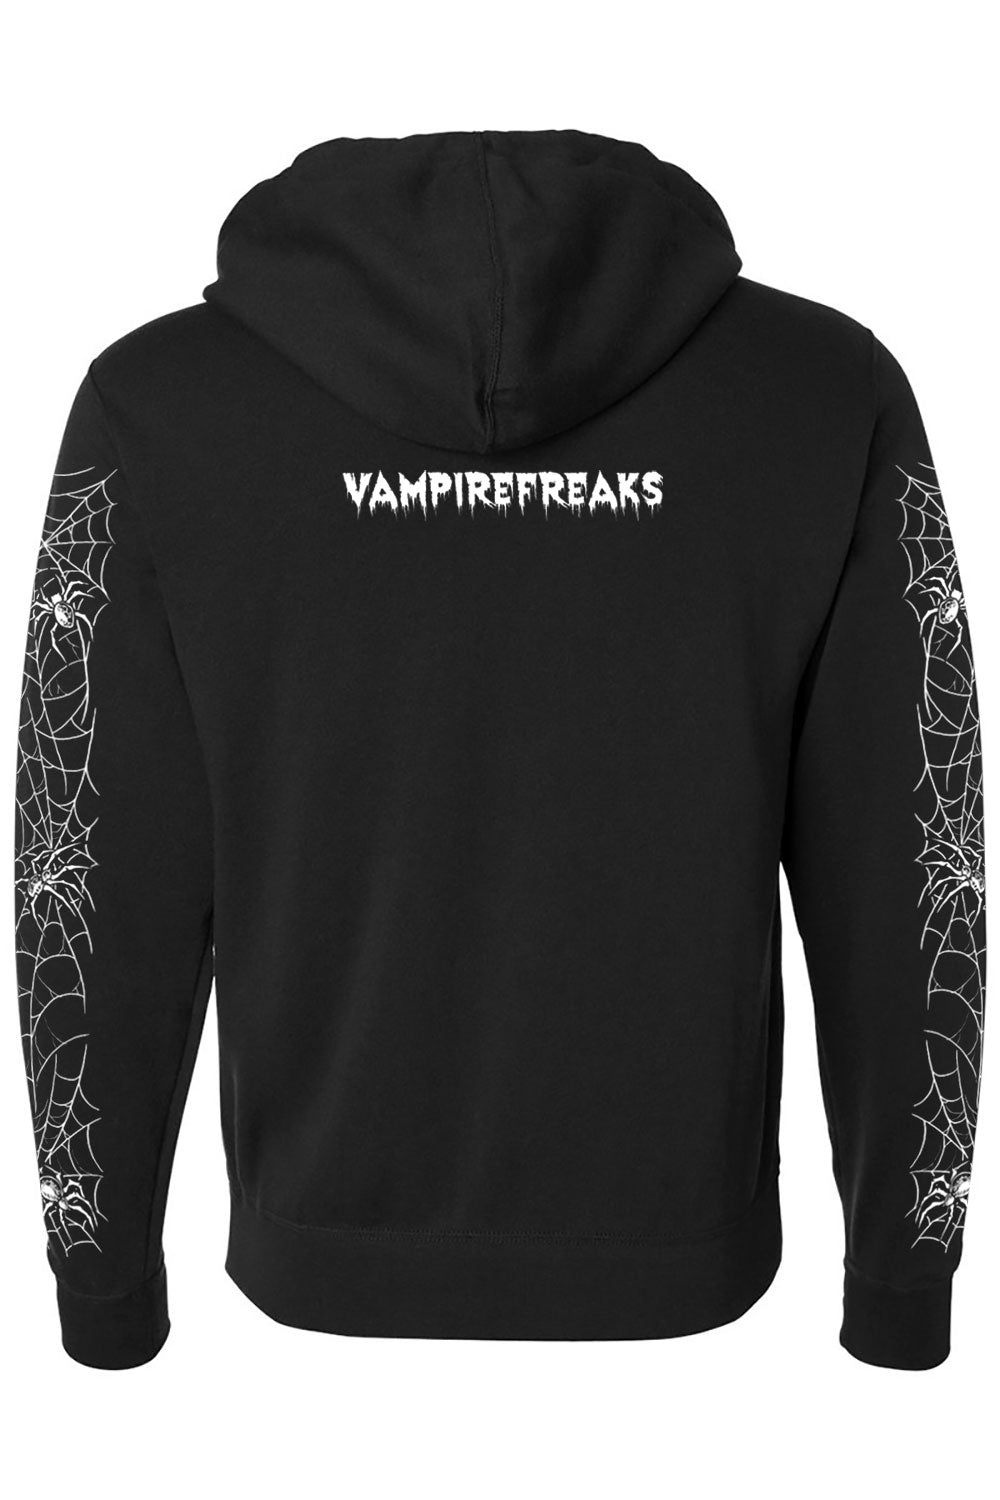 gothic hoodie with web sleeves